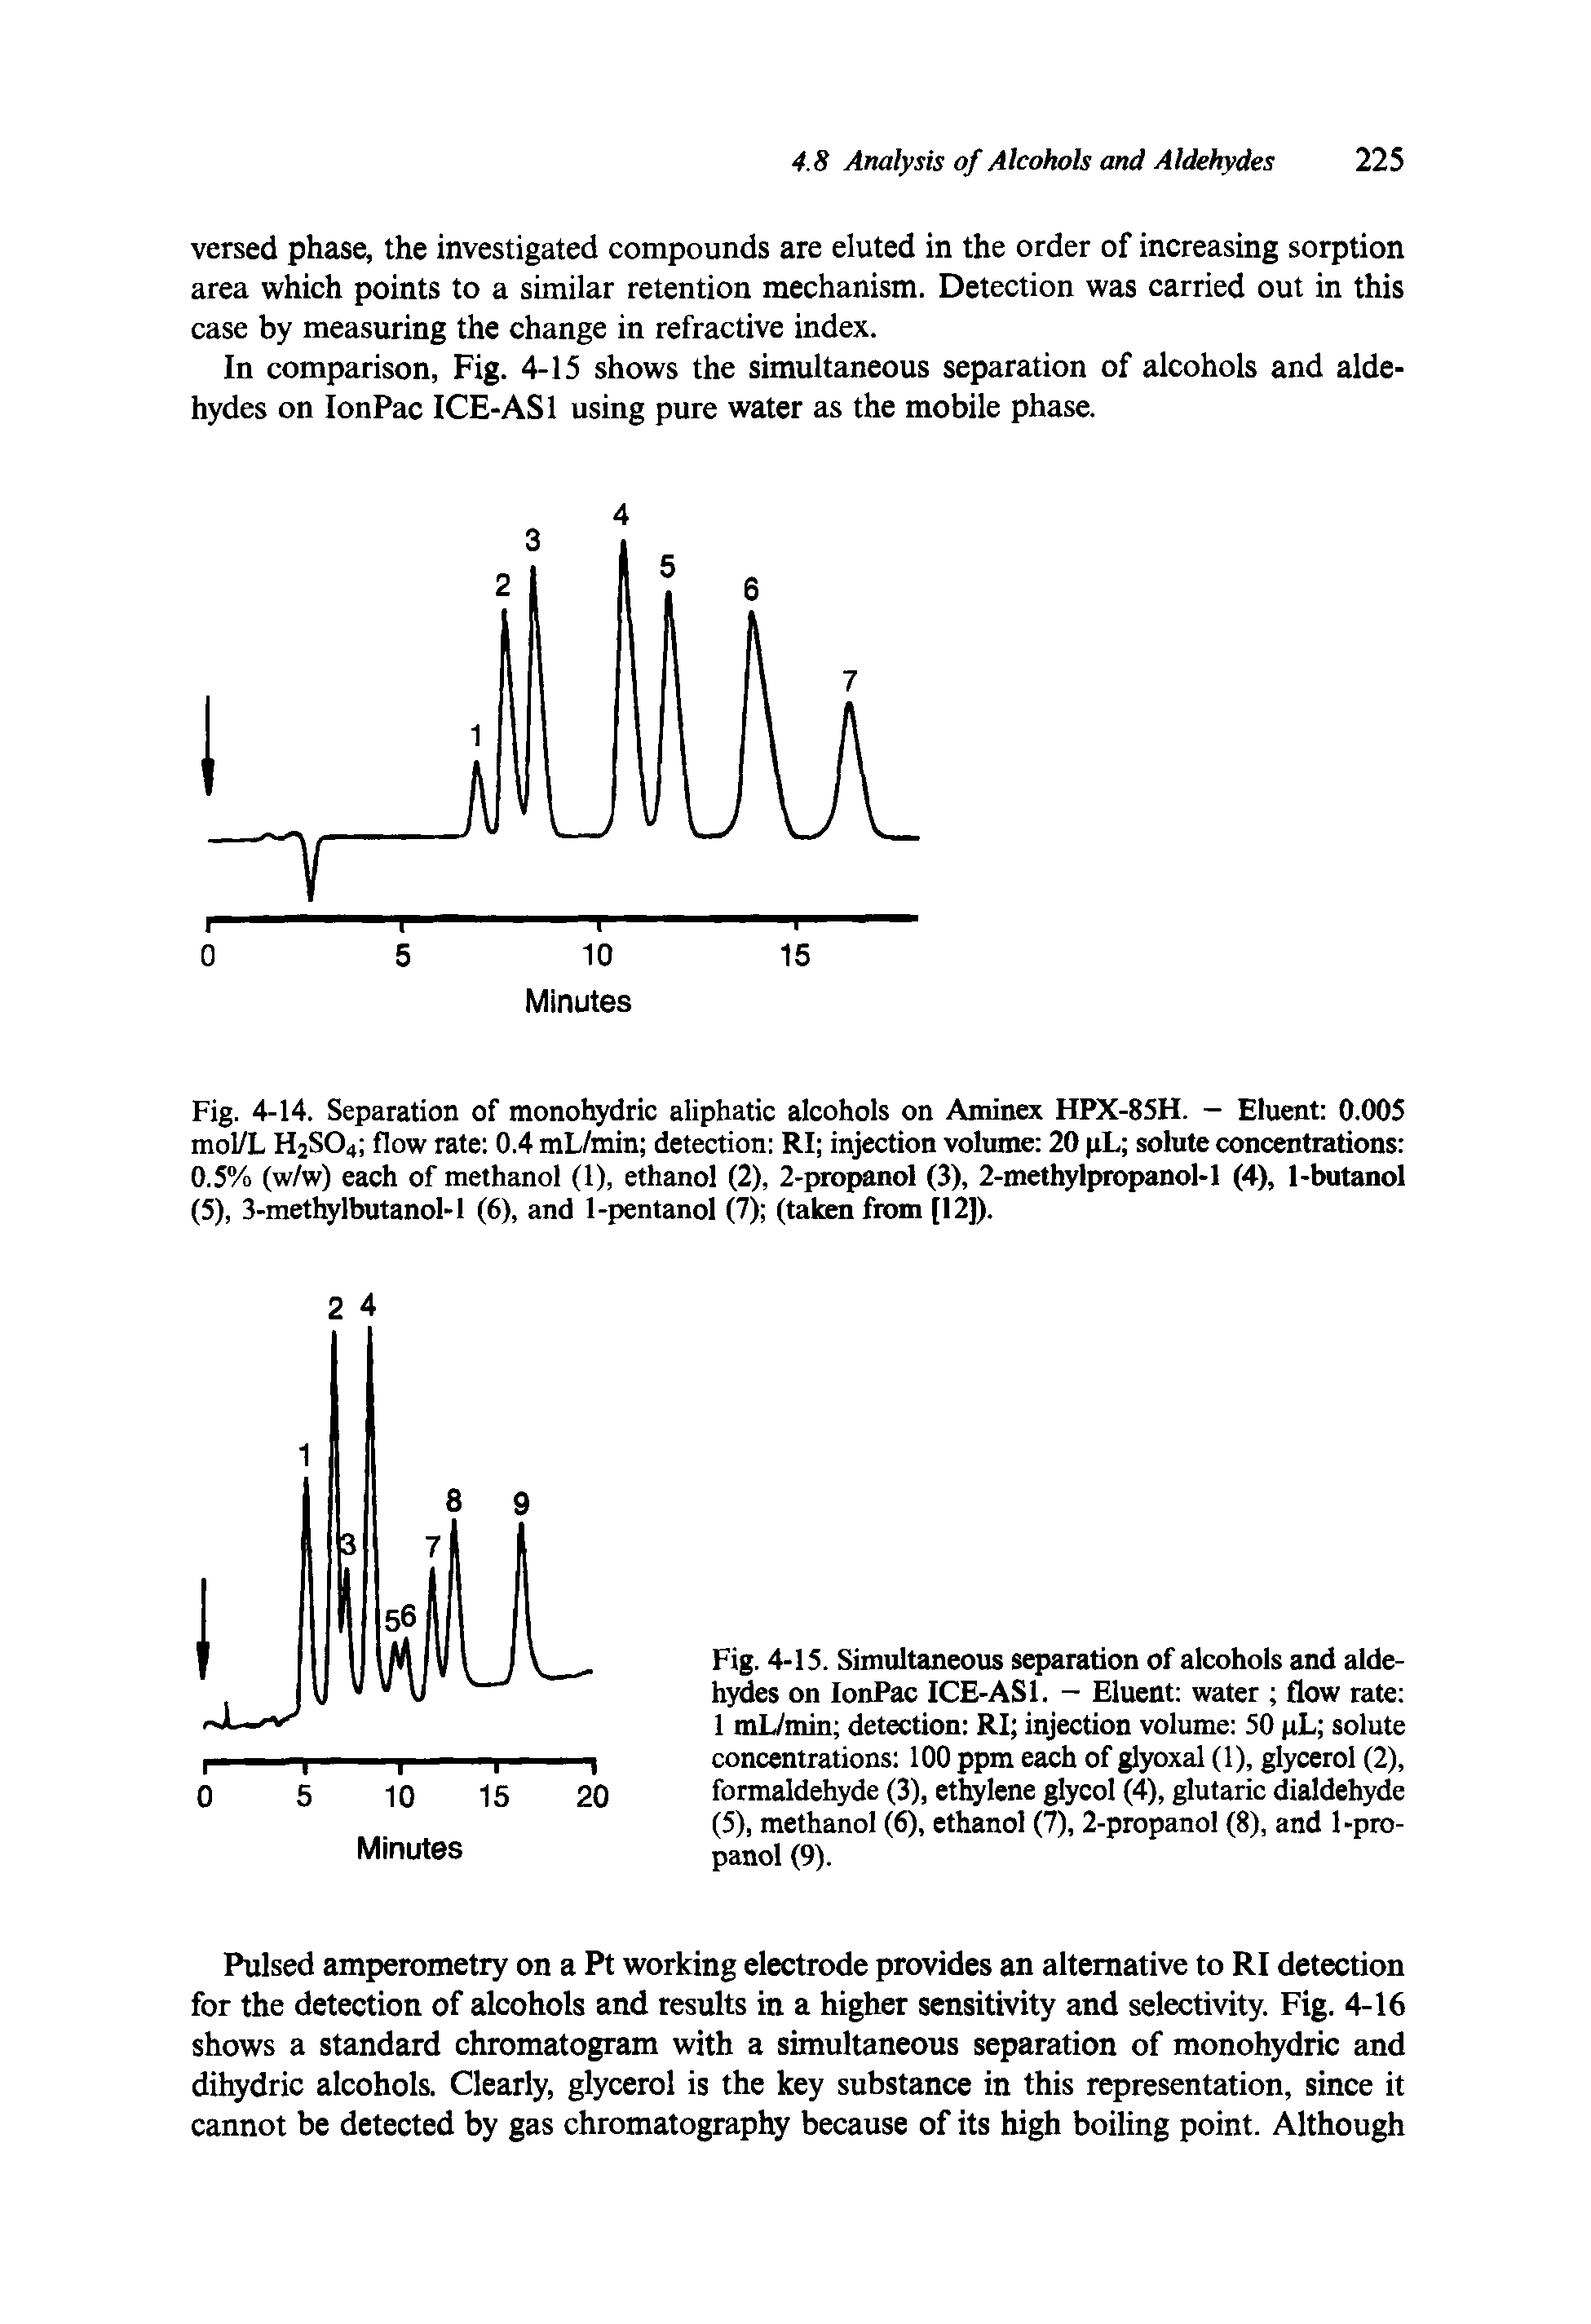 Fig. 4-15. Simultaneous separation of alcohols and aldehydes on IonPac ICE-AS1. - Eluent water flow rate 1 mL/min detection RI injection volume 50 pL solute concentrations 100 ppm each of glyoxal (1), glycerol (2), formaldehyde (3), ethylene glycol (4), glutaric dialdehyde (5), methanol (6), ethanol (7), 2-propanol (8), and 1-propanol (9).